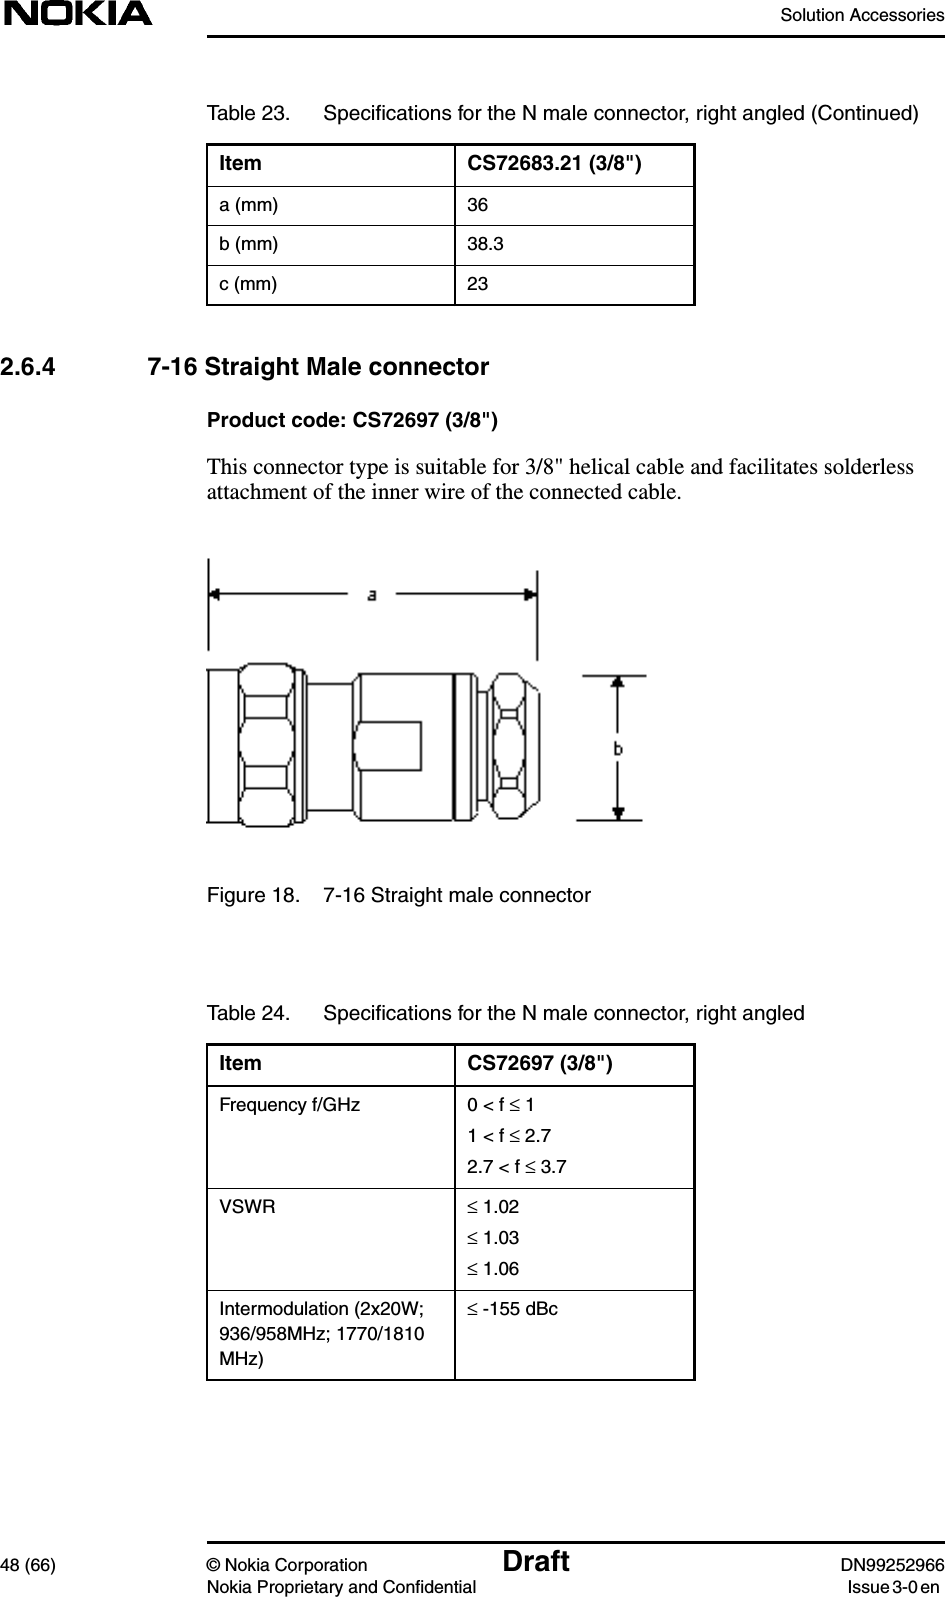 Solution Accessories48 (66) © Nokia Corporation Draft DN99252966Nokia Proprietary and Confidential Issue3-0en2.6.4 7-16 Straight Male connectorProduct code: CS72697 (3/8&quot;)This connector type is suitable for 3/8&quot; helical cable and facilitates solderlessattachment of the inner wire of the connected cable.Figure 18. 7-16 Straight male connectora (mm) 36b (mm) 38.3c (mm) 23Table 23. Speciﬁcations for the N male connector, right angled (Continued)Item CS72683.21 (3/8&quot;)Table 24. Speciﬁcations for the N male connector, right angledItem CS72697 (3/8&quot;)Frequency f/GHz 0 &lt; f ≤ 11 &lt; f ≤ 2.72.7 &lt; f ≤ 3.7VSWR ≤ 1.02≤ 1.03≤ 1.06Intermodulation (2x20W;936/958MHz; 1770/1810MHz)≤ -155 dBc